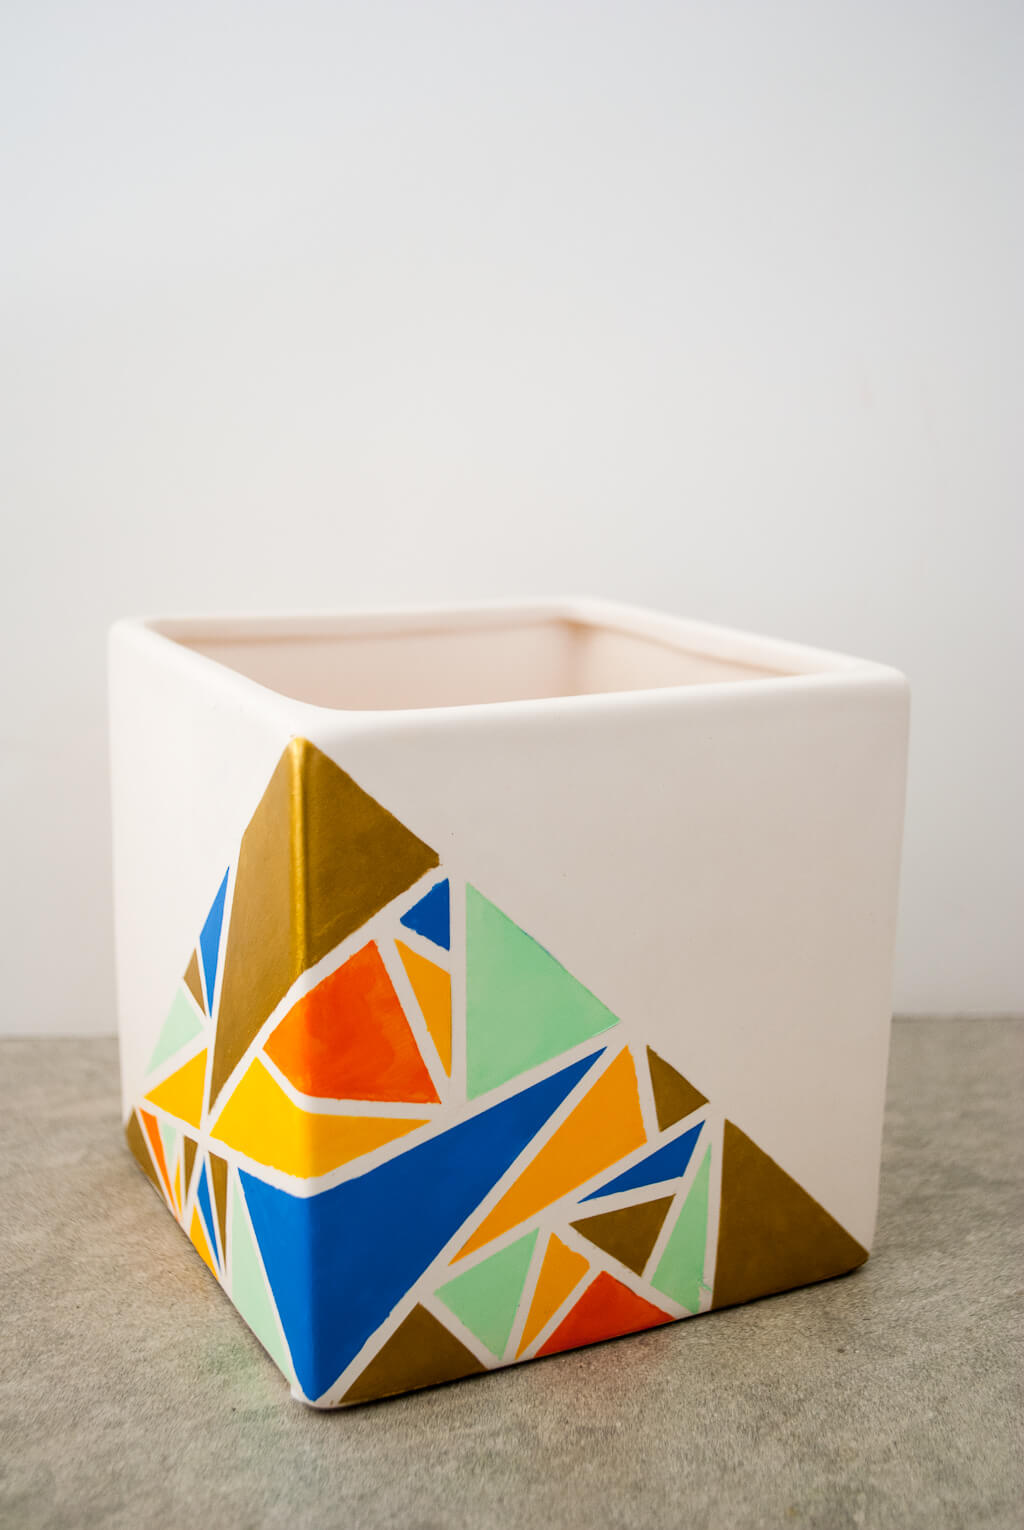 Painted geometric planter with colorful triangles